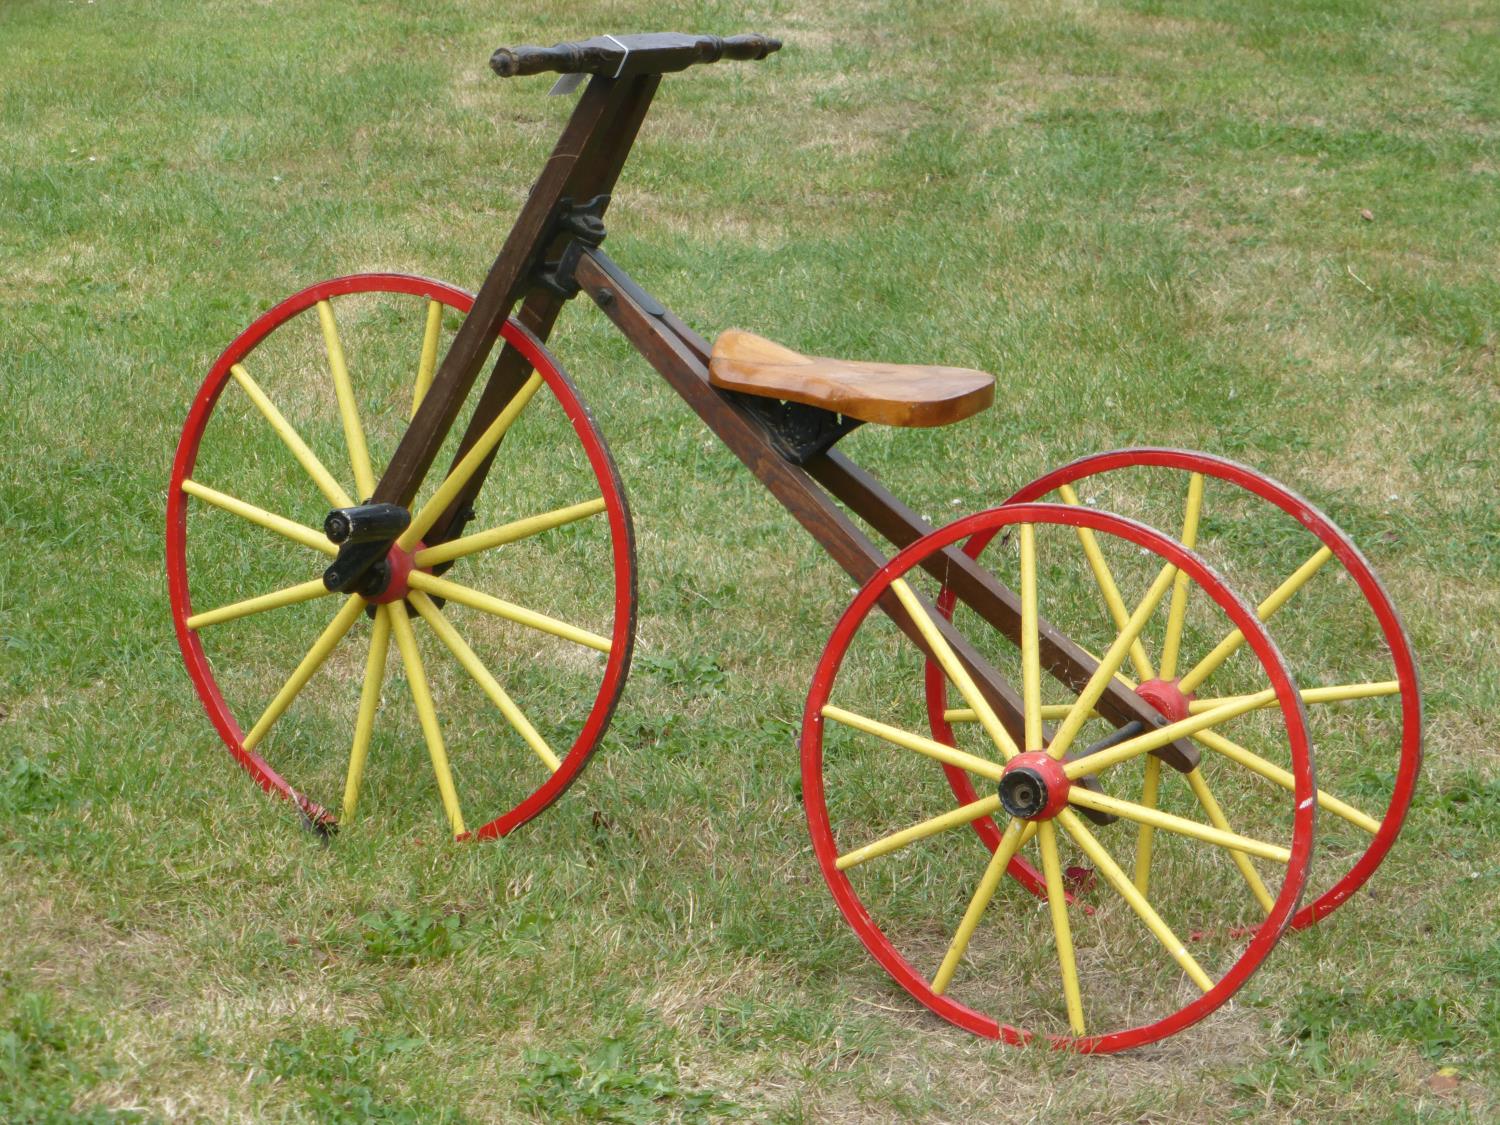 A Child's Wooden-Framed Vélocipède. A tricycle with a 25-inch steering and driving wheel, wooden